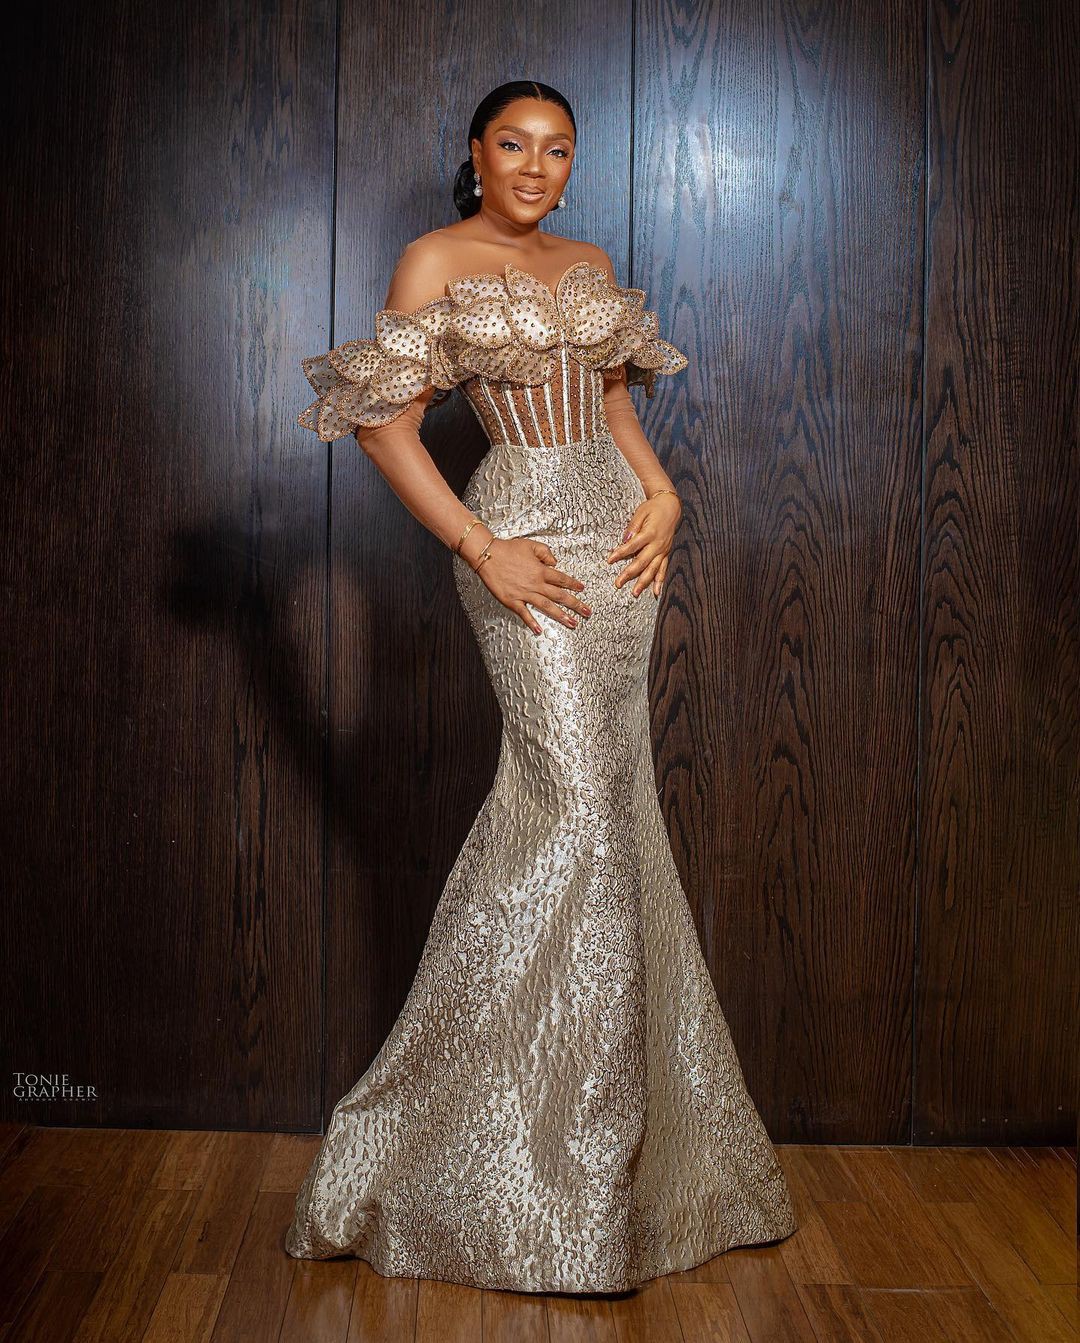 lagos-lately-7-looks-we-loved-to-see-on-stylish-nigerian-celebs